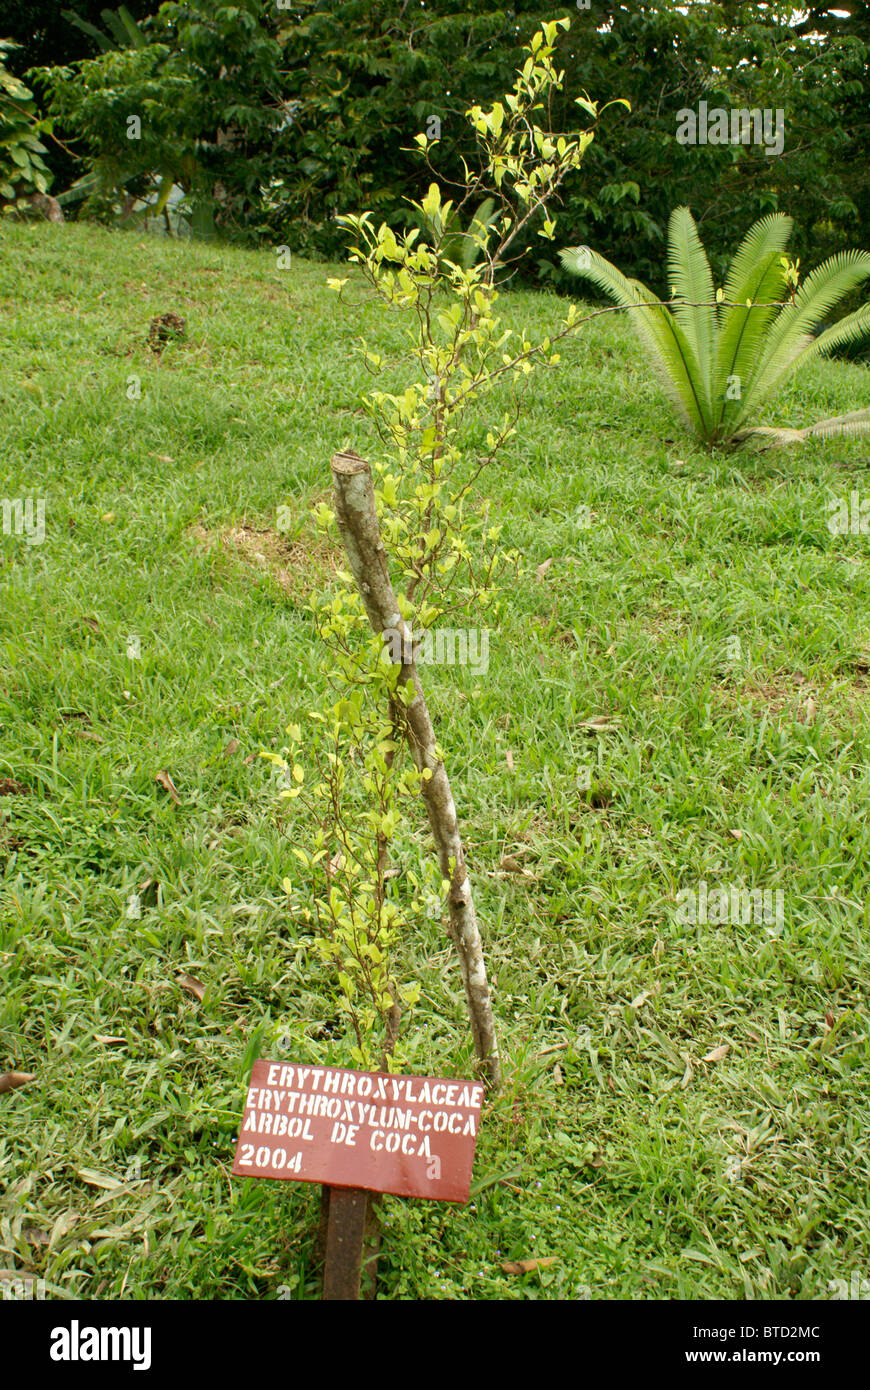 Coca plant from which cocaine is made, Lancetilla Botanical Garden, Honduras. Stock Photo